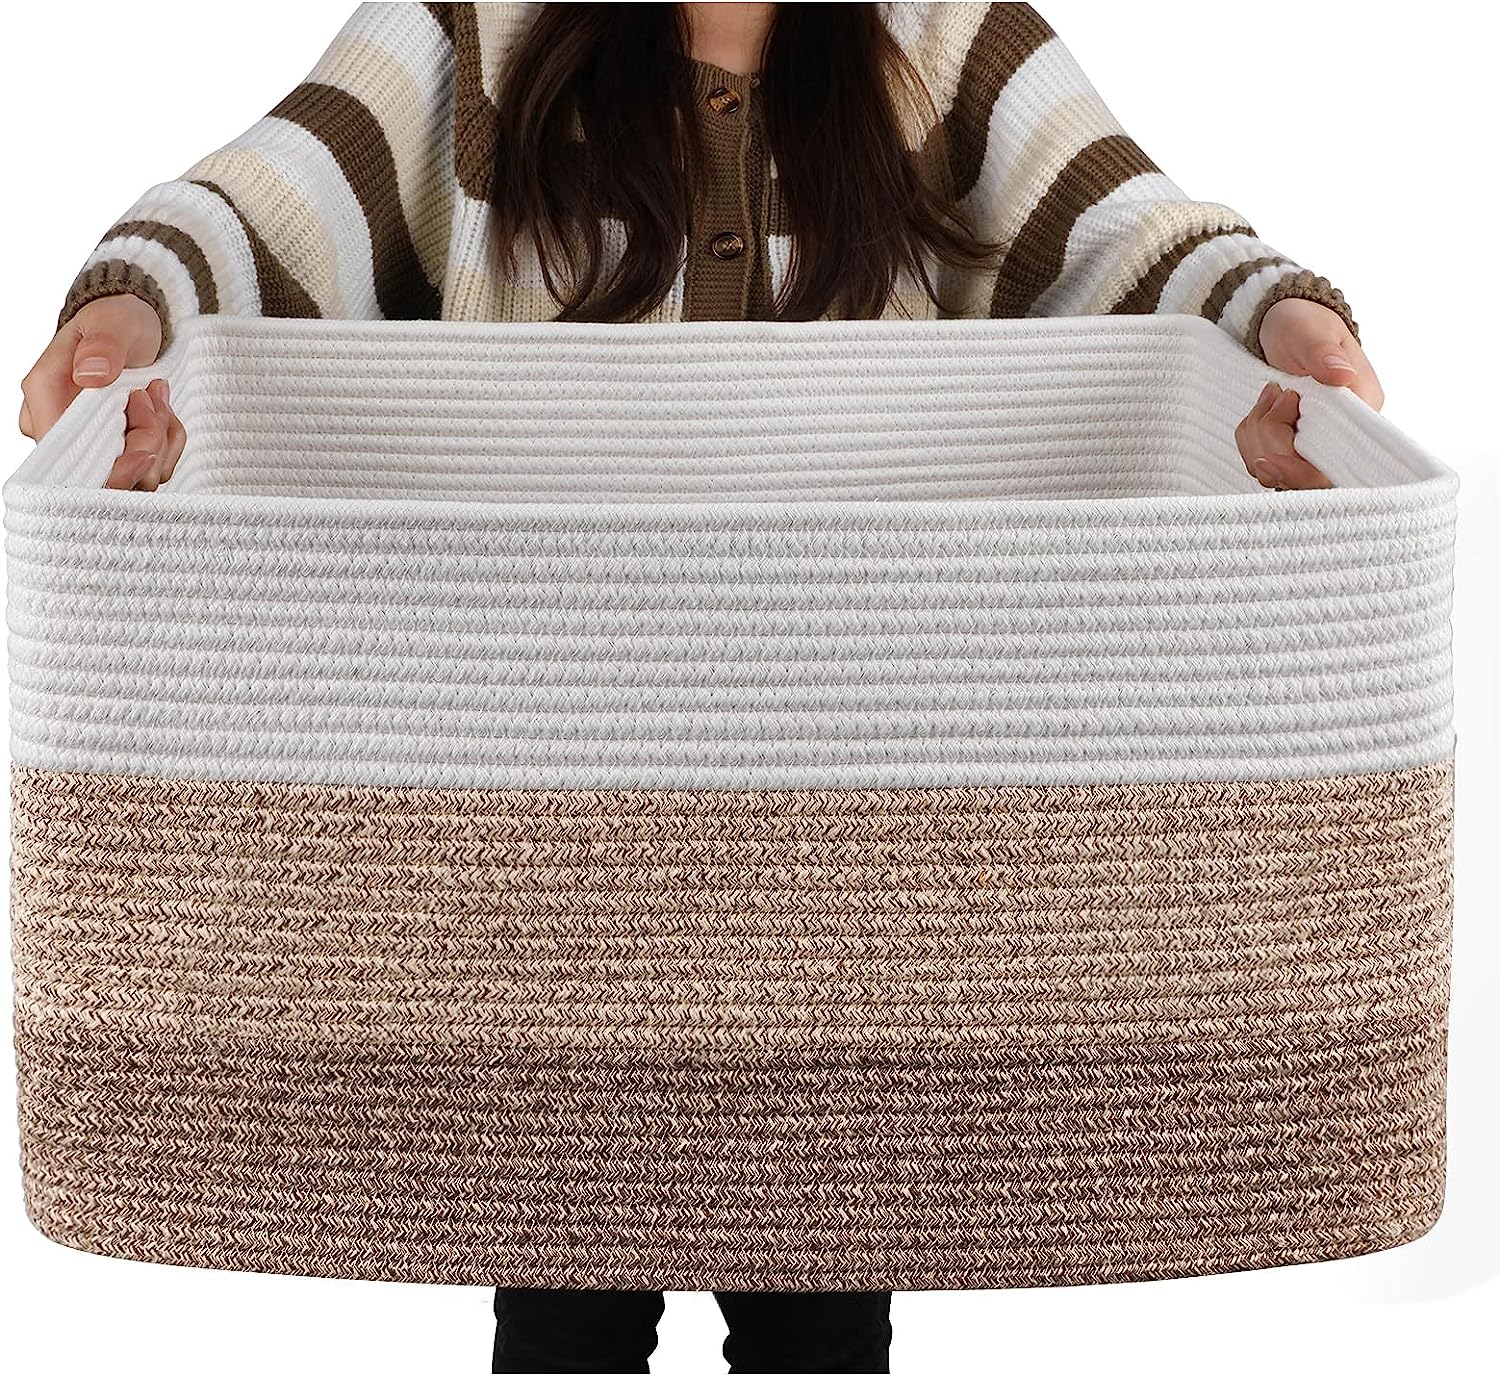  OIAHOMY Large Rectangle Blanket Basket, Woven Nursery Cotton Rope Baskets for Storage, Living Room, Toy Organizing with Handle-22x17x12-Gradient Yellow 